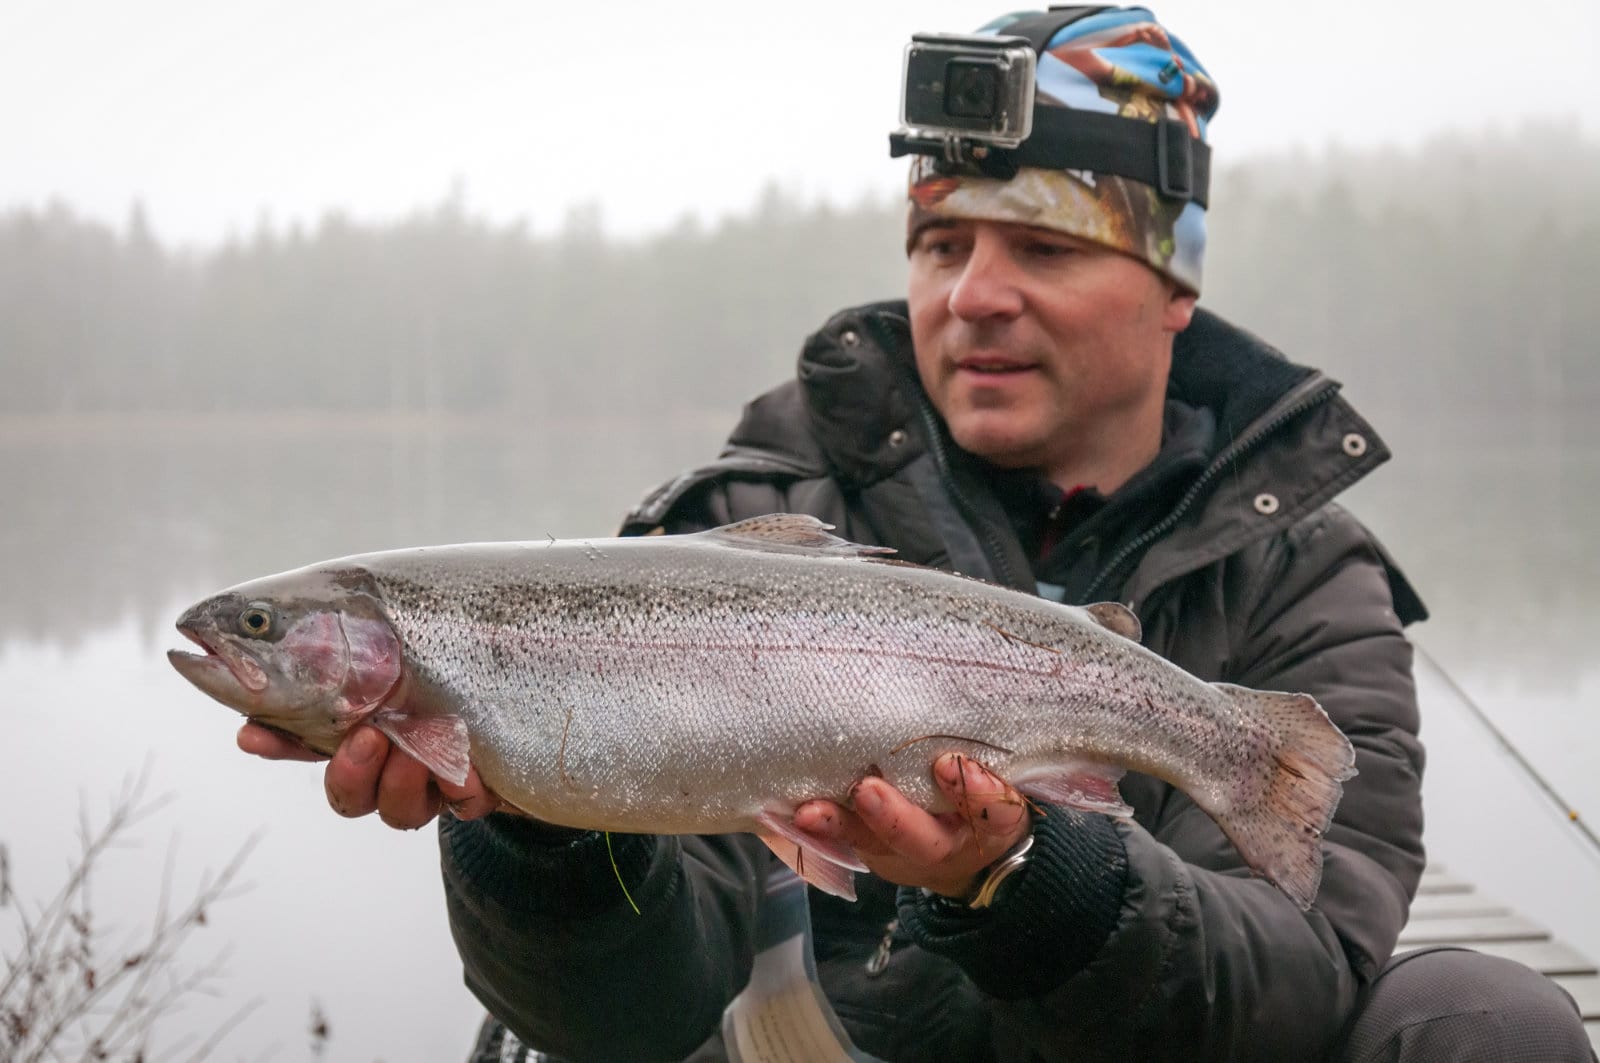 How To CATCH Salmon, Trout, & Steelhead With SPINNERS. (EASY To